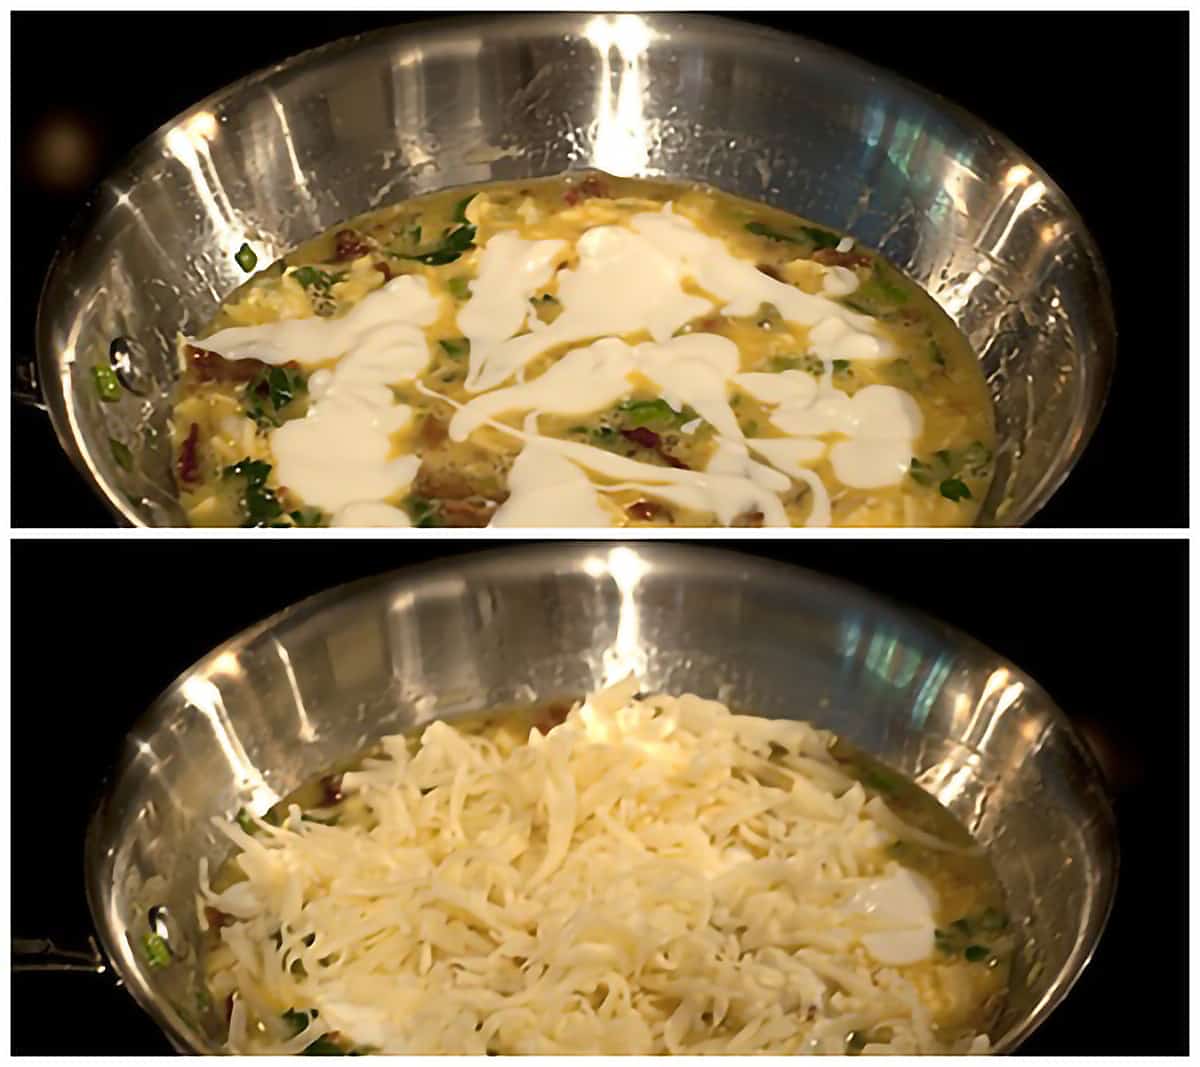 Collage showing the addition of sour cream and then cheese on top of partially cooked eggs in skillet.